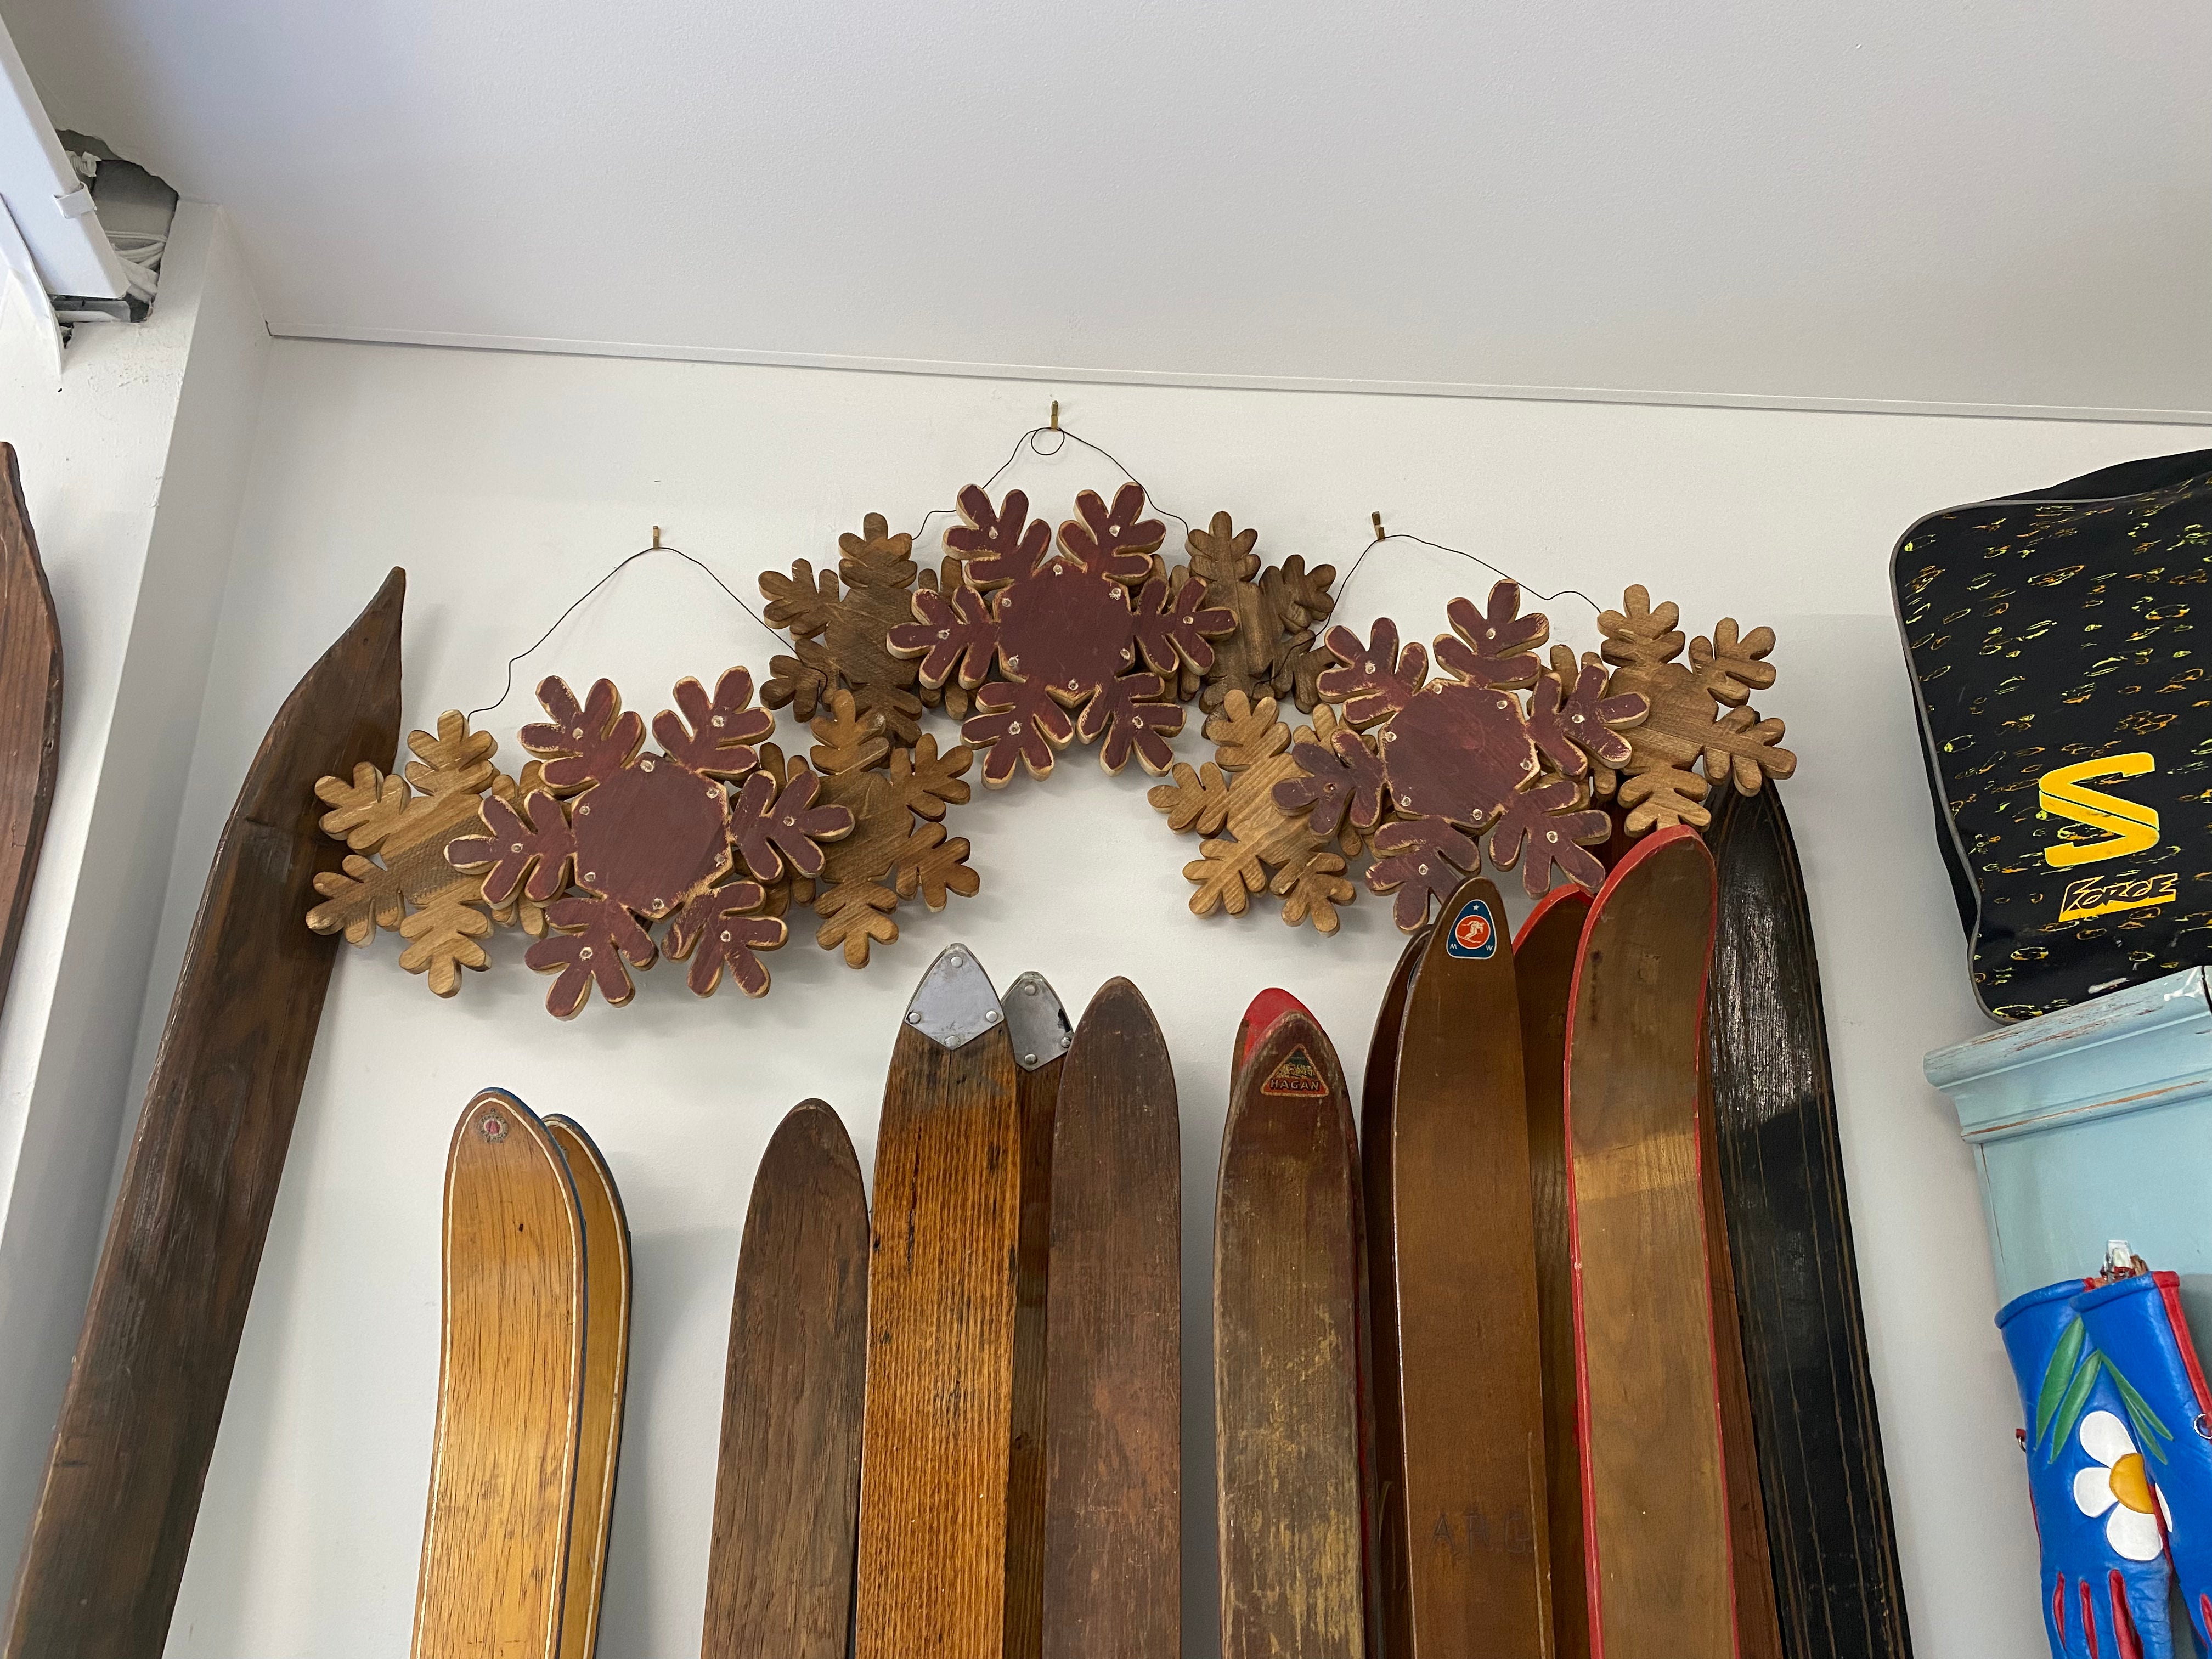 3 Wood snowflake wall decor with Led lights shown as the lights are dimming, on a white wall with 3 HAM Rabbit Prints & wooden skis underneath the snowflakes